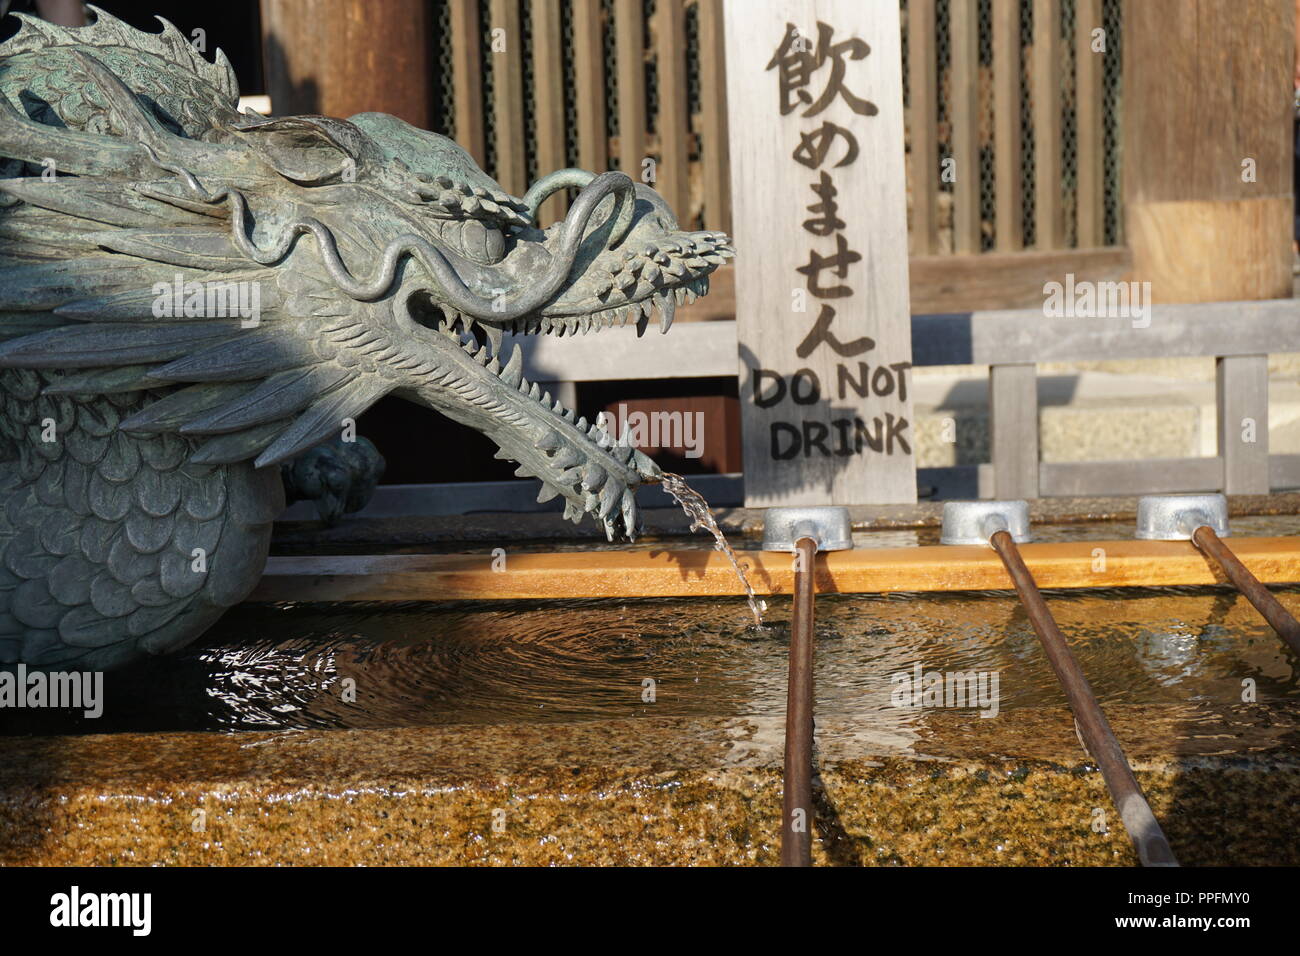 Kyoto, Japan - August 01, 2018: the water fountain for hand washing at the Kiyomizu-dera buddhist temple, a UNESCO World Cultural Heritage site.  Phot Stock Photo